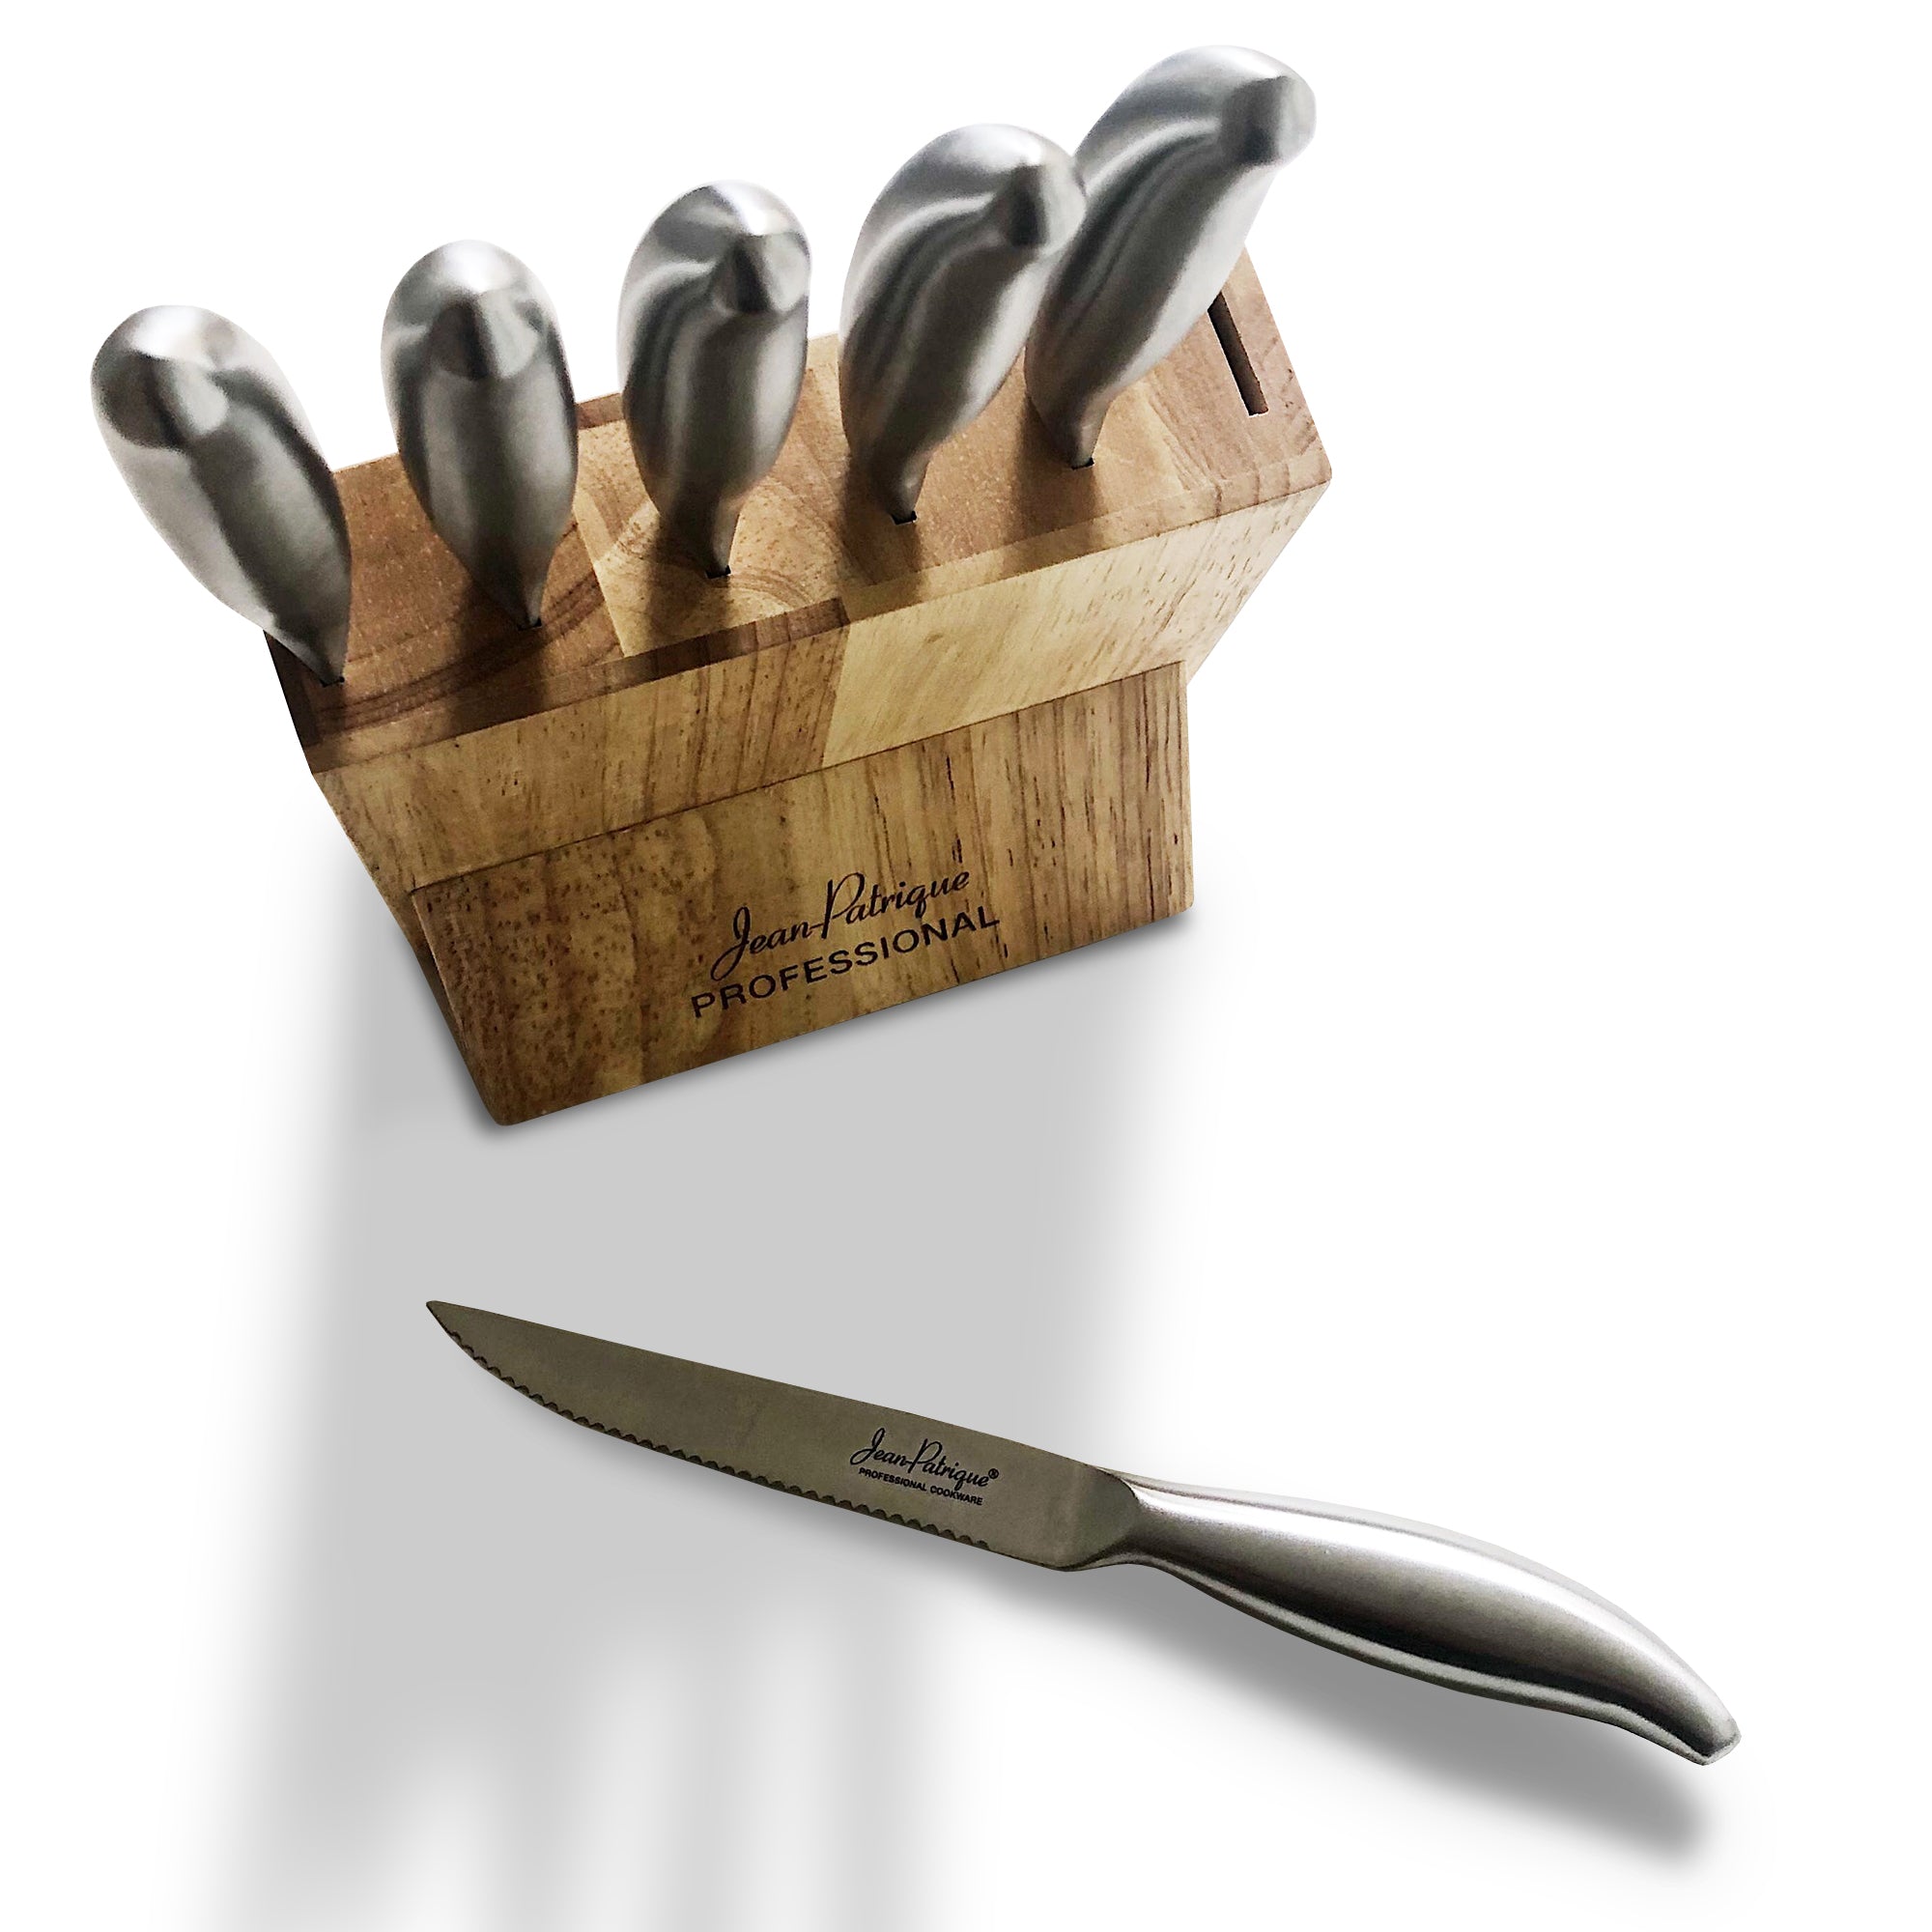 Jean-Patrique 6-Piece Stainless Steel Steak Knife Sets - with Block